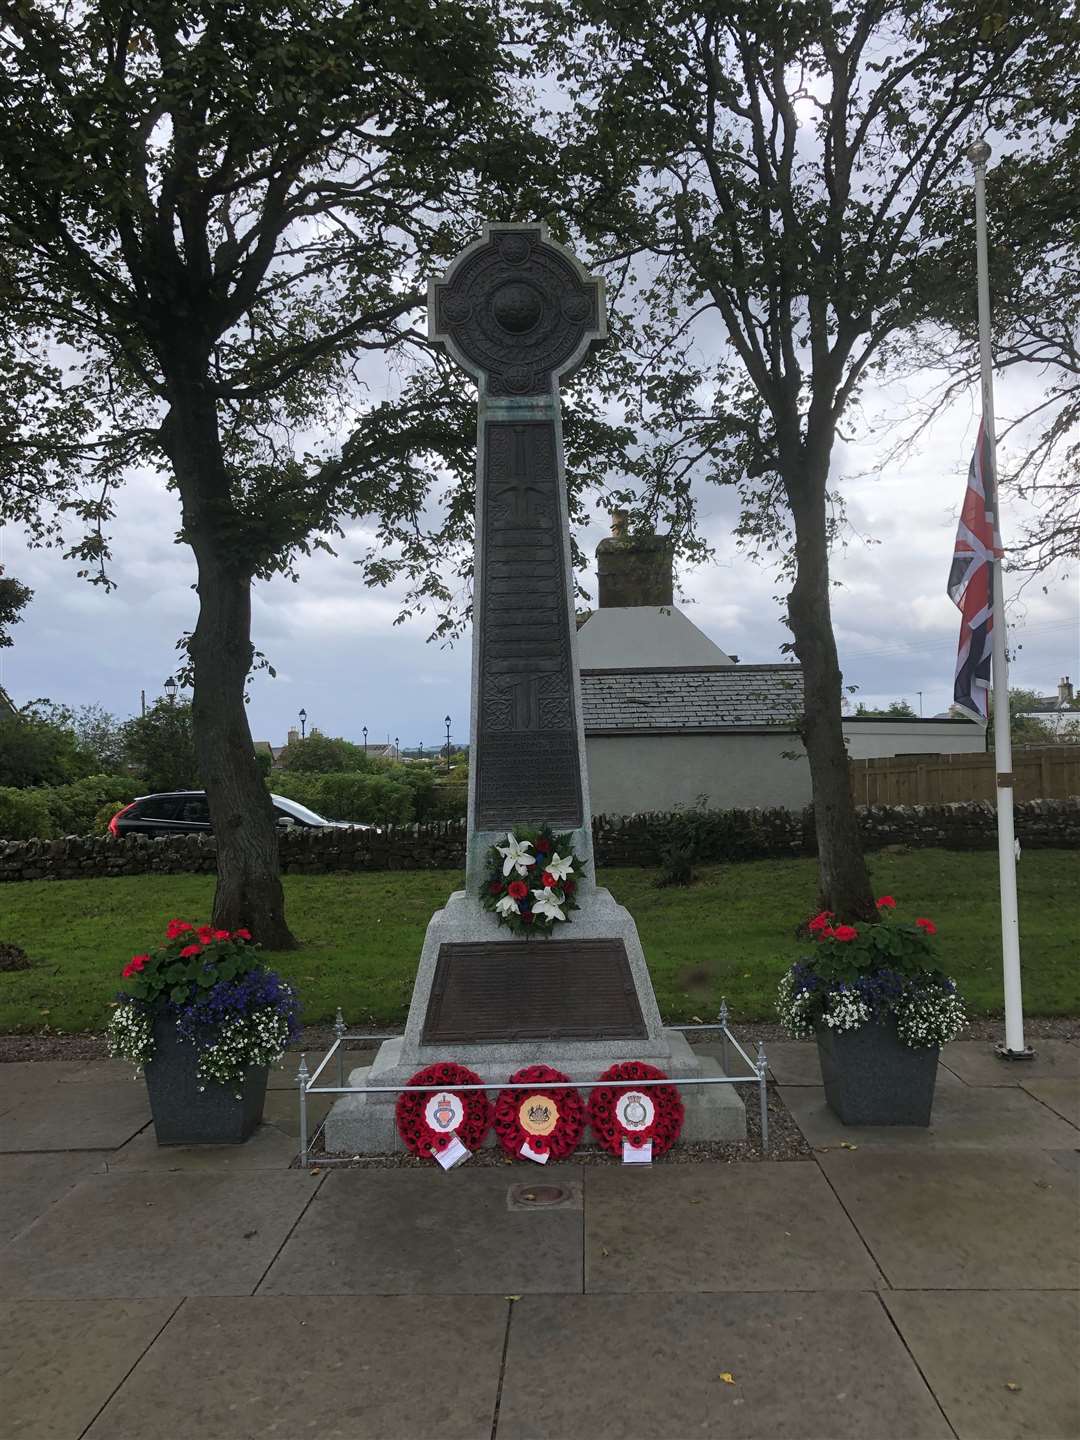 Wreaths were laid by Donald Rowe, chairman of RBLS Golspie branch and Captain Paul Lemkes president of the RNA Sutherland Branch. A beautiful floral wreath was laid by Ross Whitehead on behalf of the village.